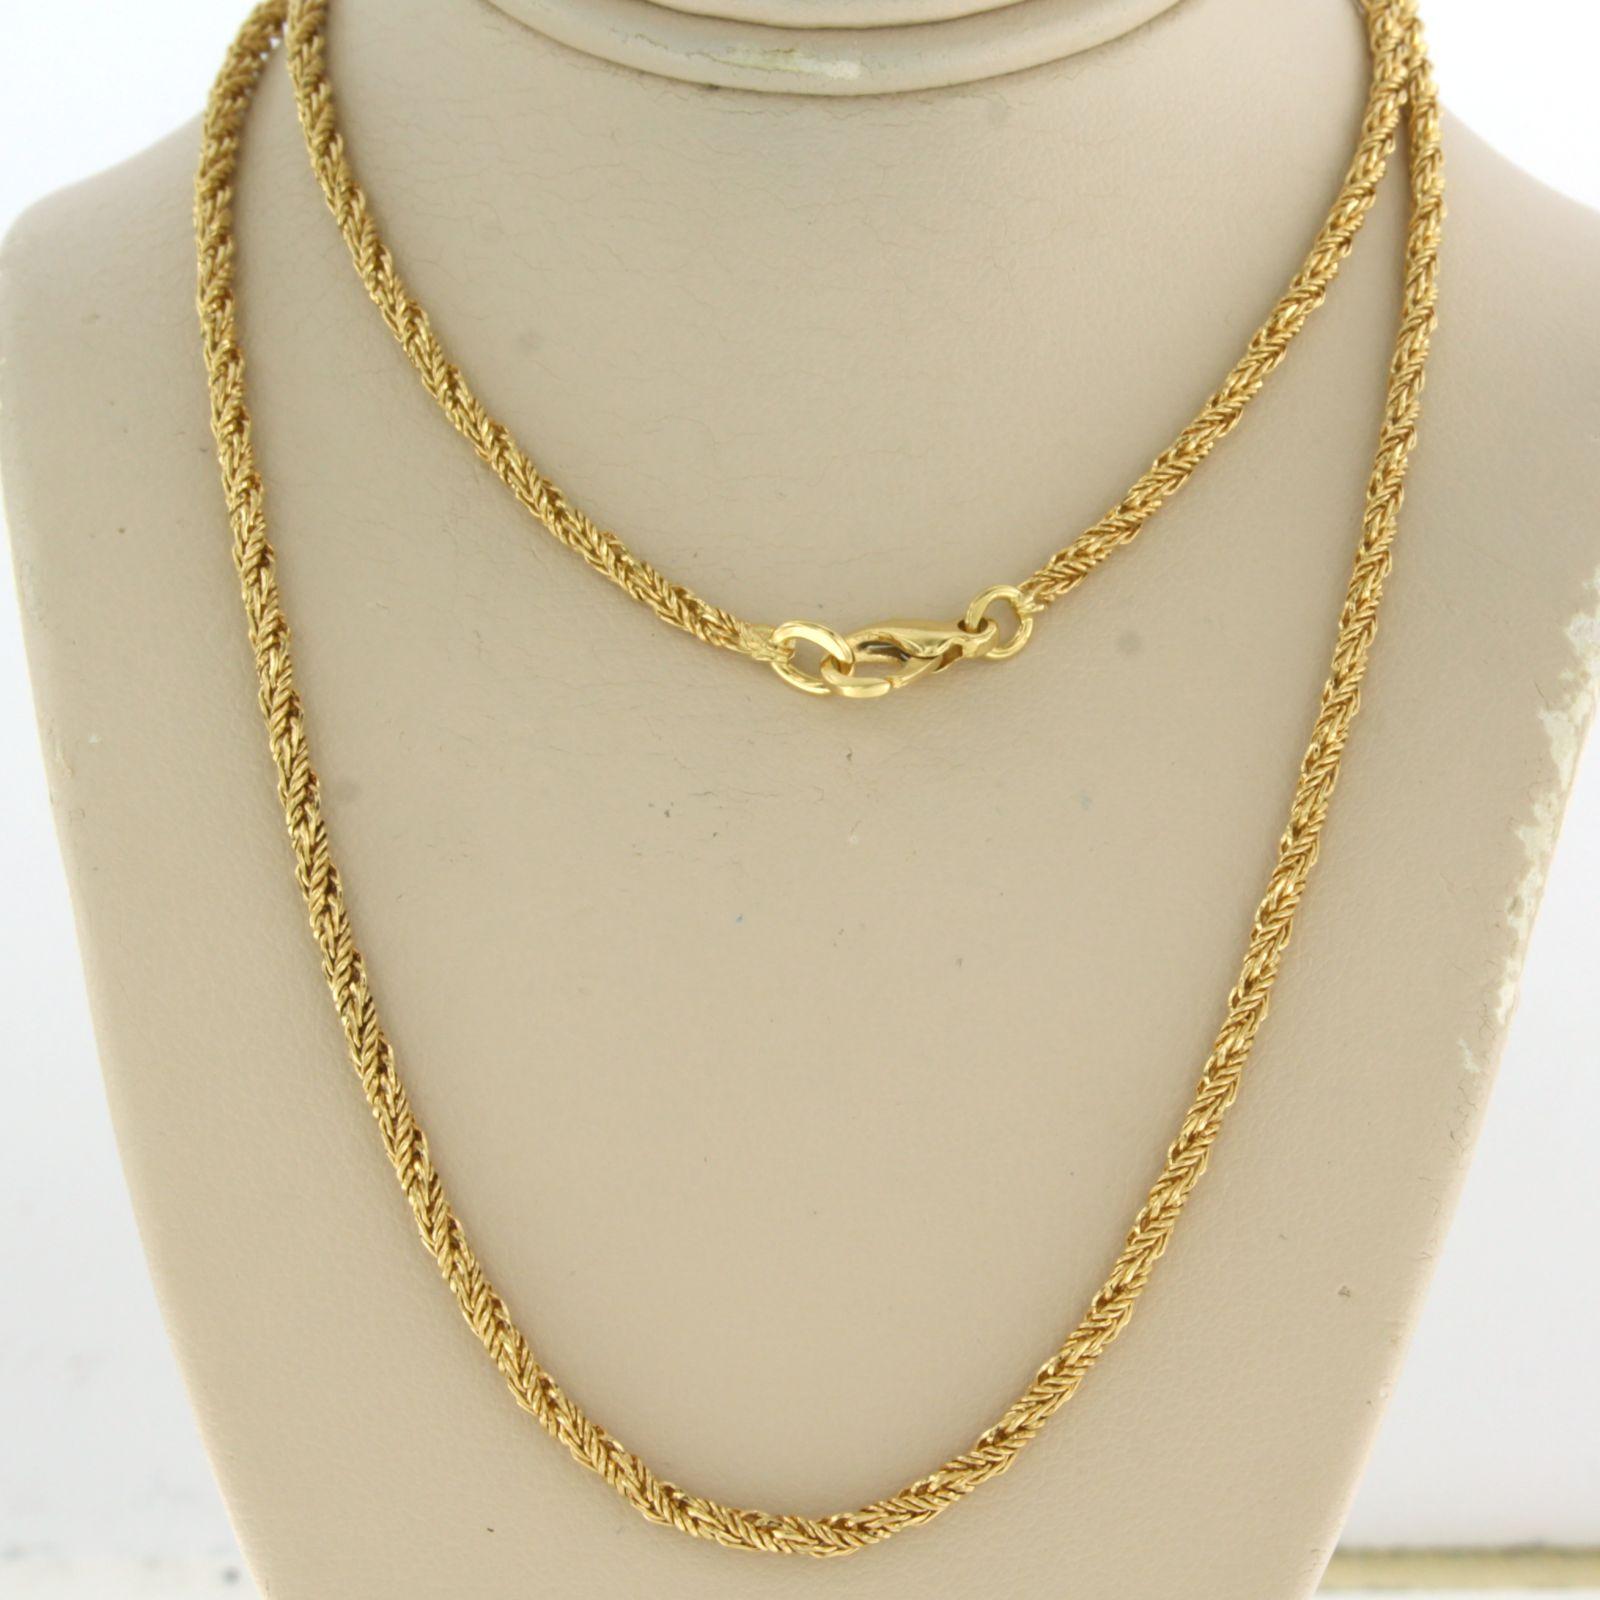 Women's Necklace 18k yellow gold 45 cm long For Sale